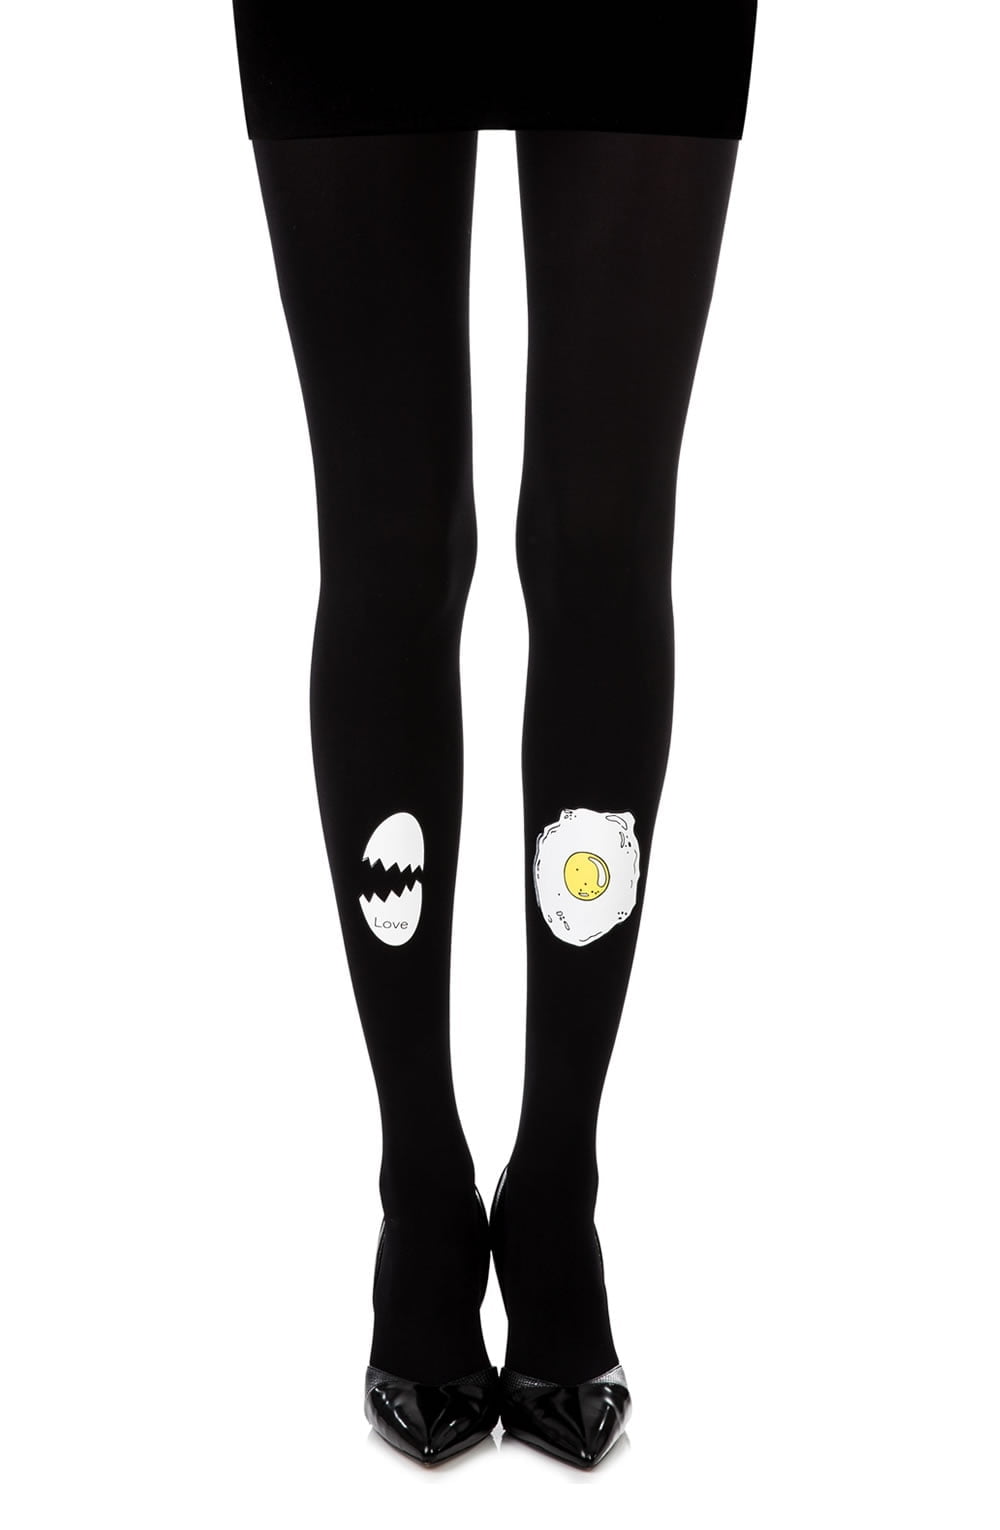 Vibrators, Sex Toy Kits and Sex Toys at Cloud9Adults - Zohara "Sunny Side Up" Black Print Tights - Buy Sex Toys Online